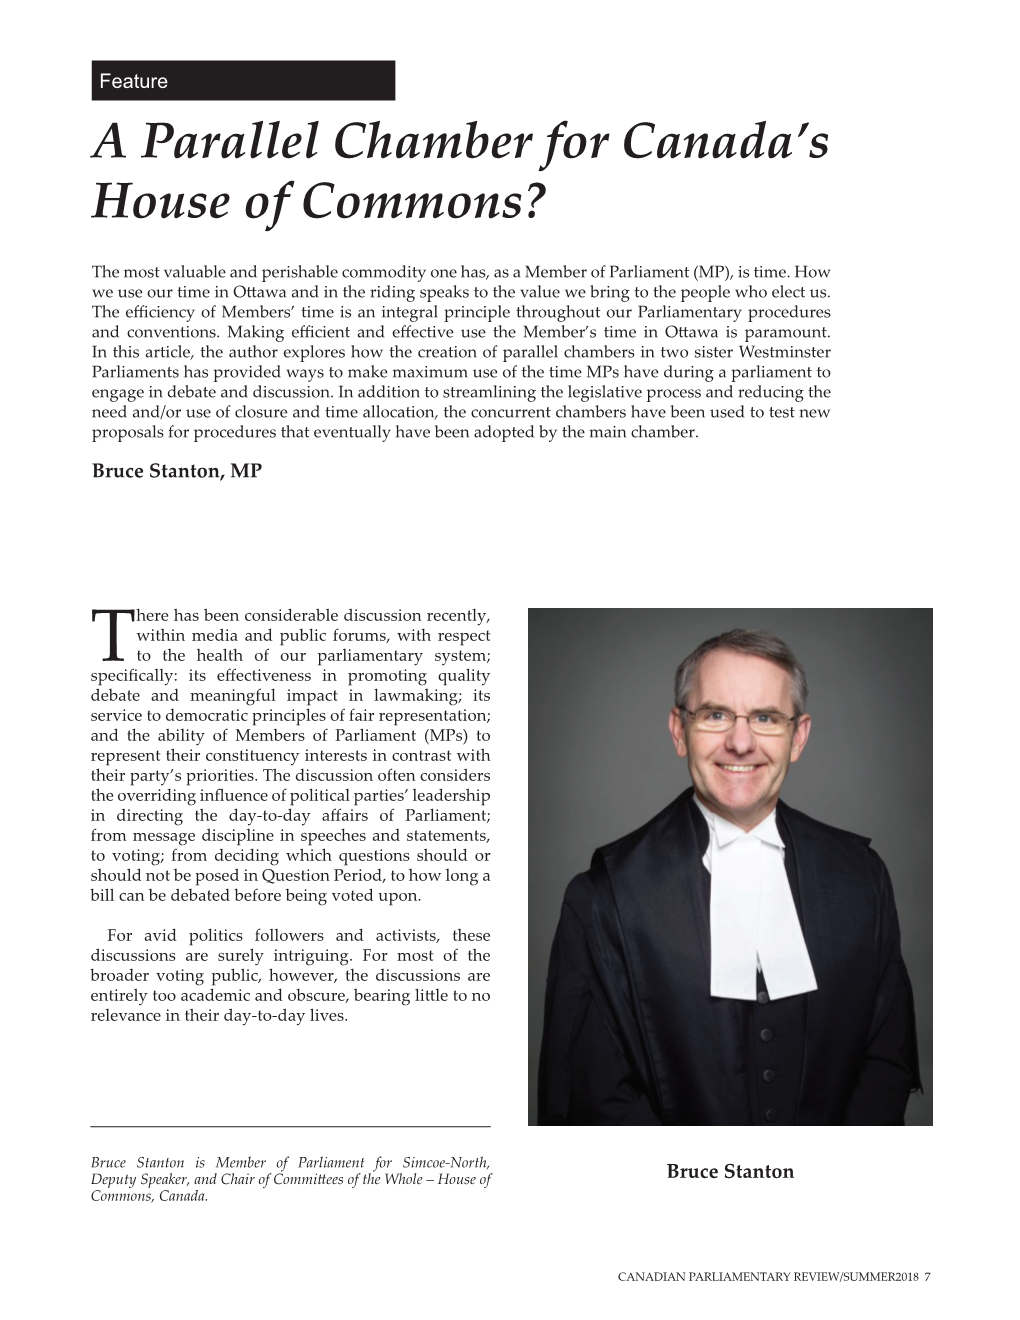 A Parallel Chamber for Canada's House of Commons?